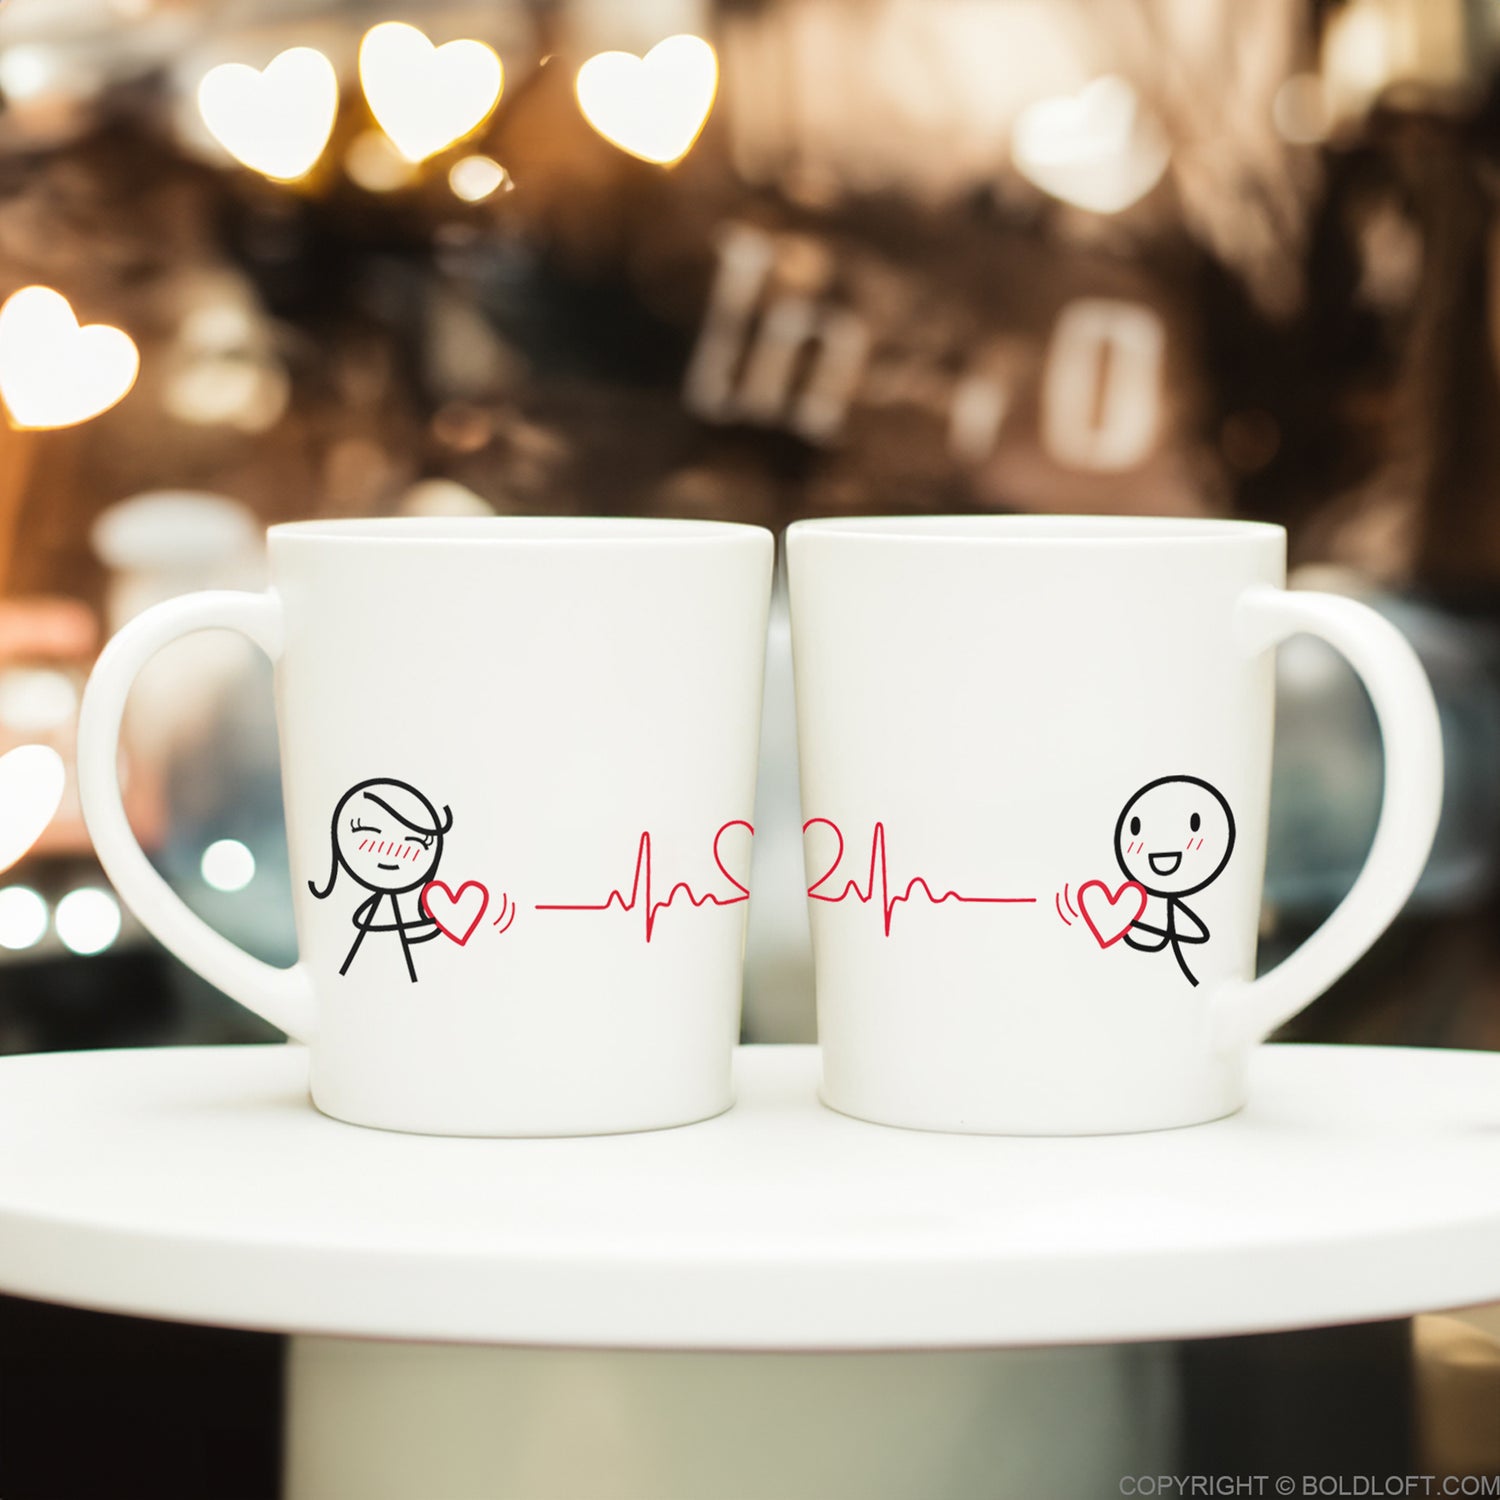 BoldLoft Love You with Every Beat of My Heart Couple Coffee Mugs- Couple mugs for him and her with heart designs make them perfect gift for couples.